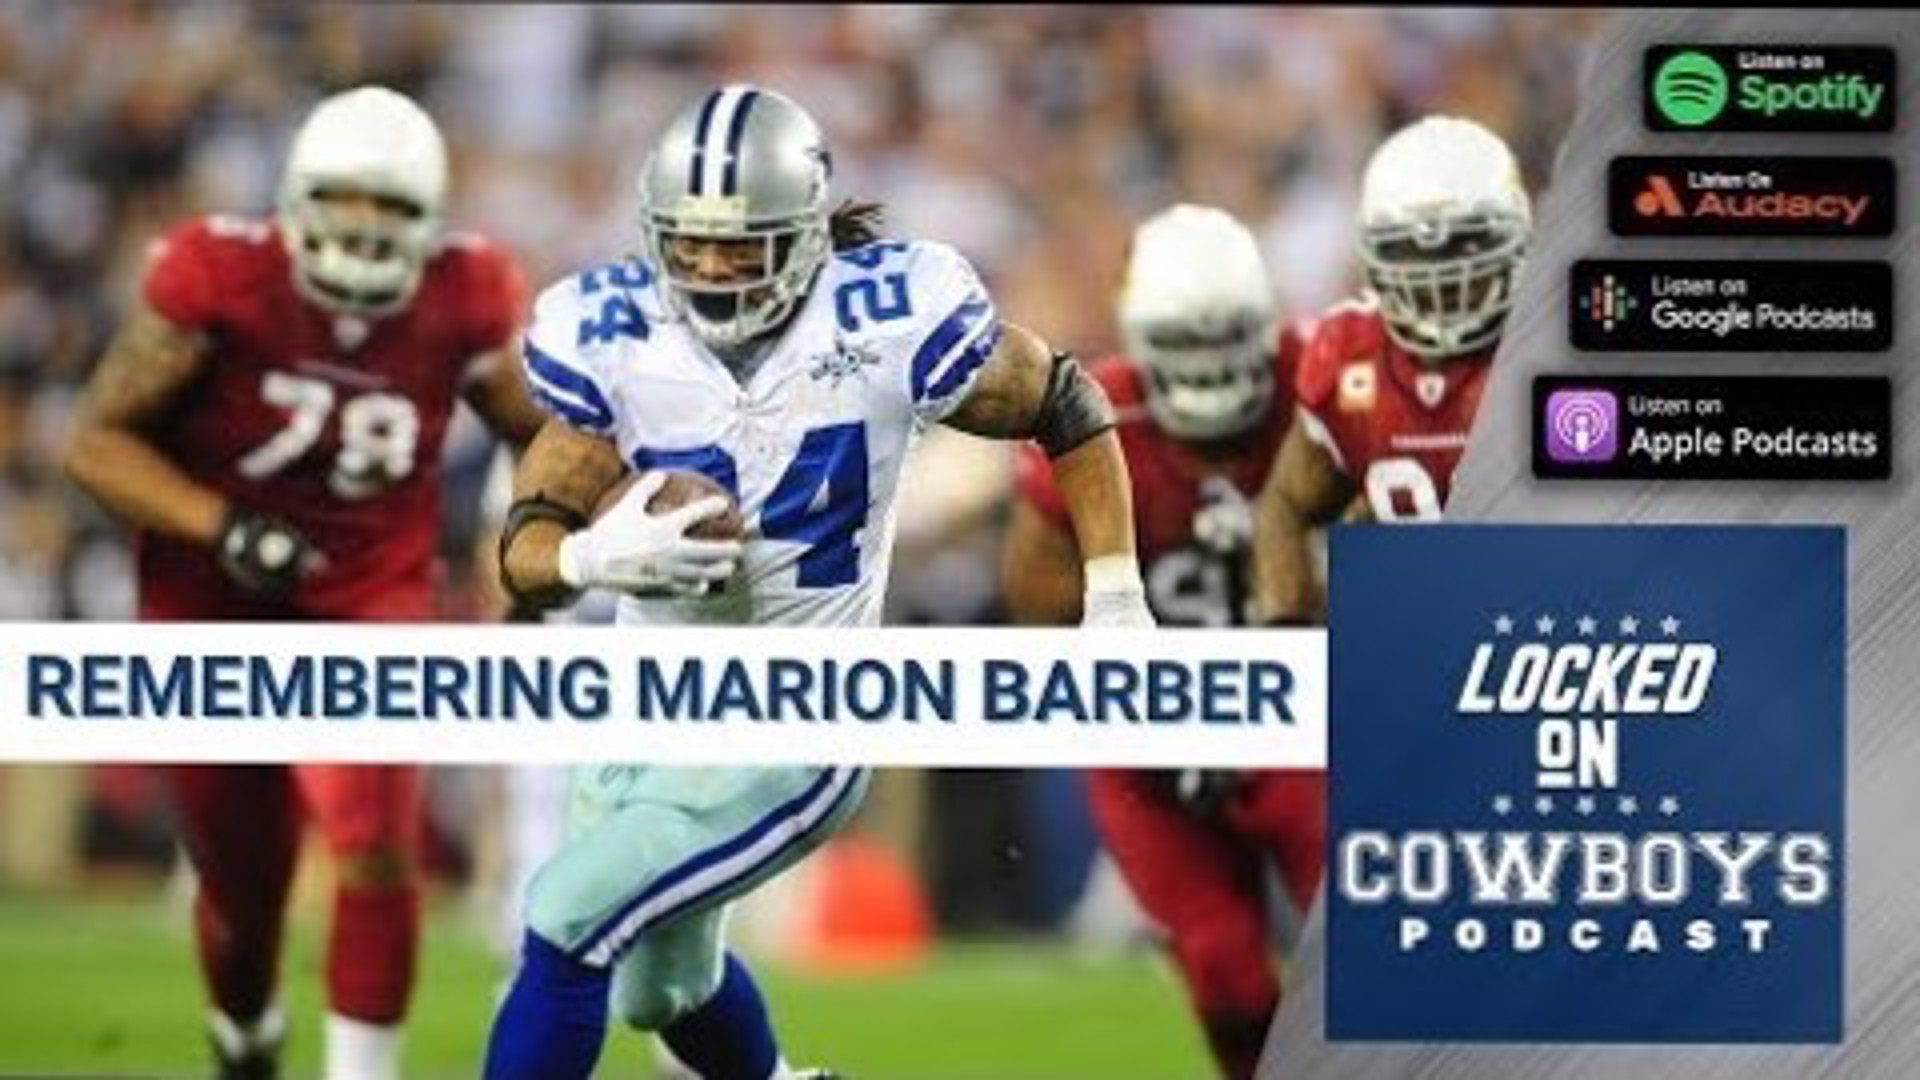 Marcus Mosher and Landon McCool discuss the tragic passing of Dallas Cowboys RB Marion Barber III.